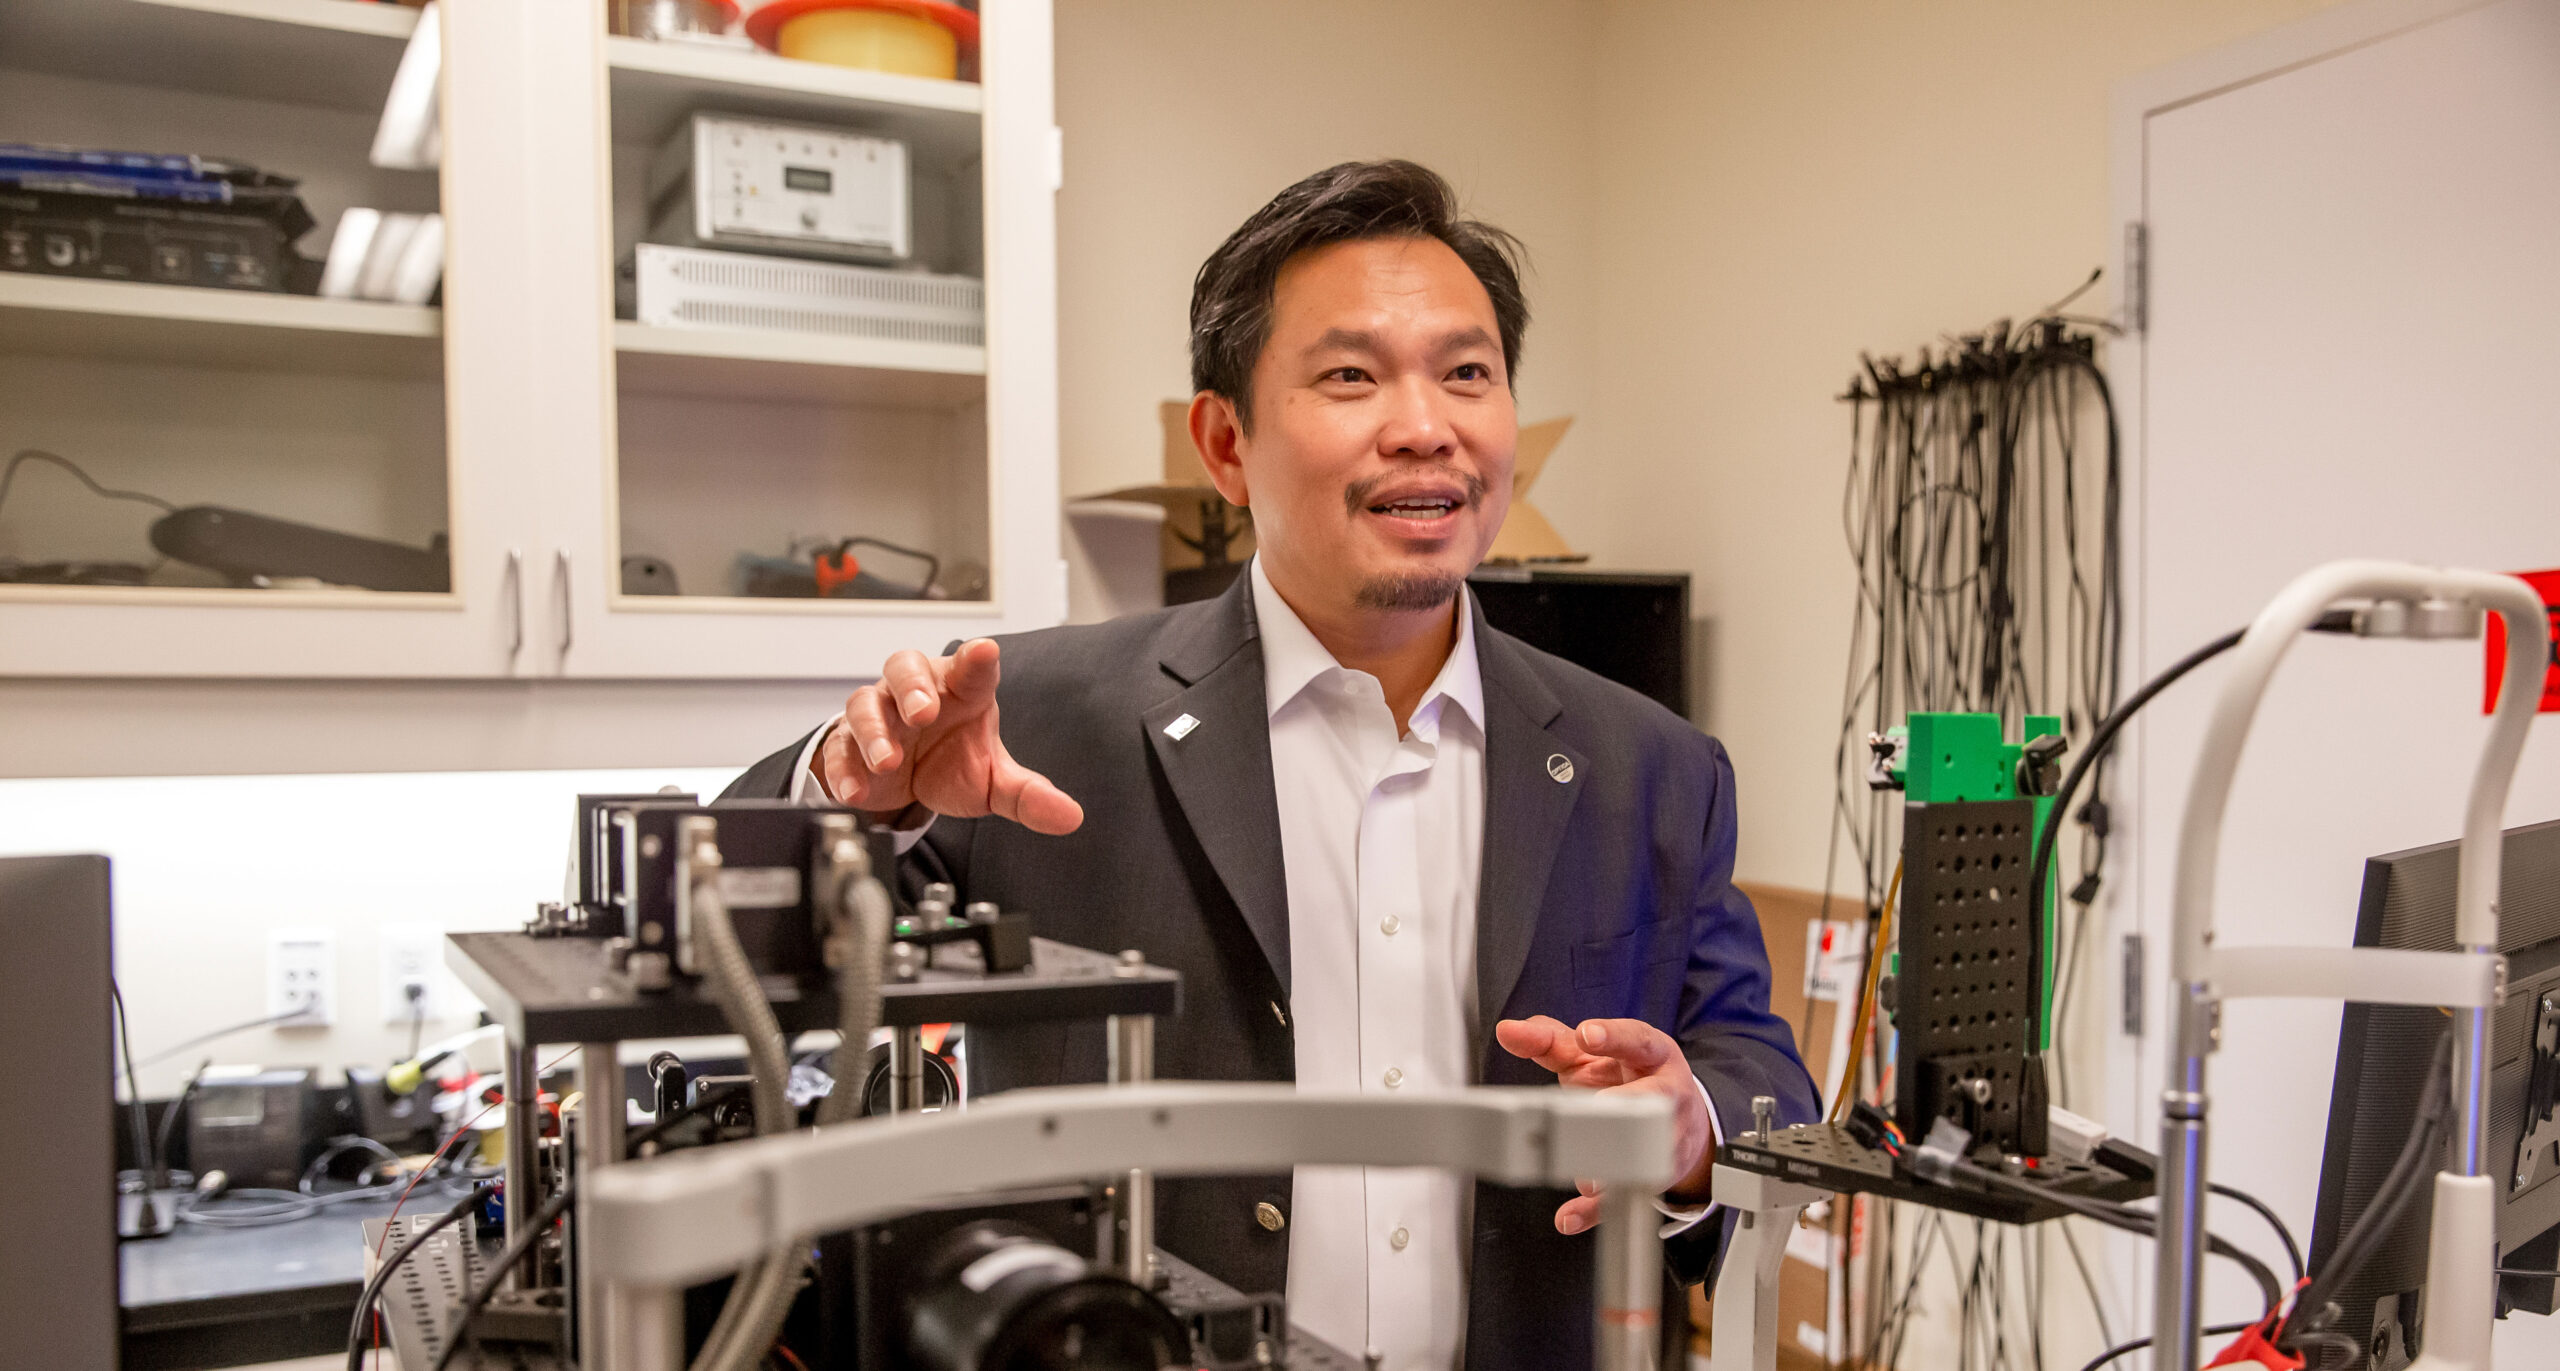 David Huang stands next to equipment in his lab.